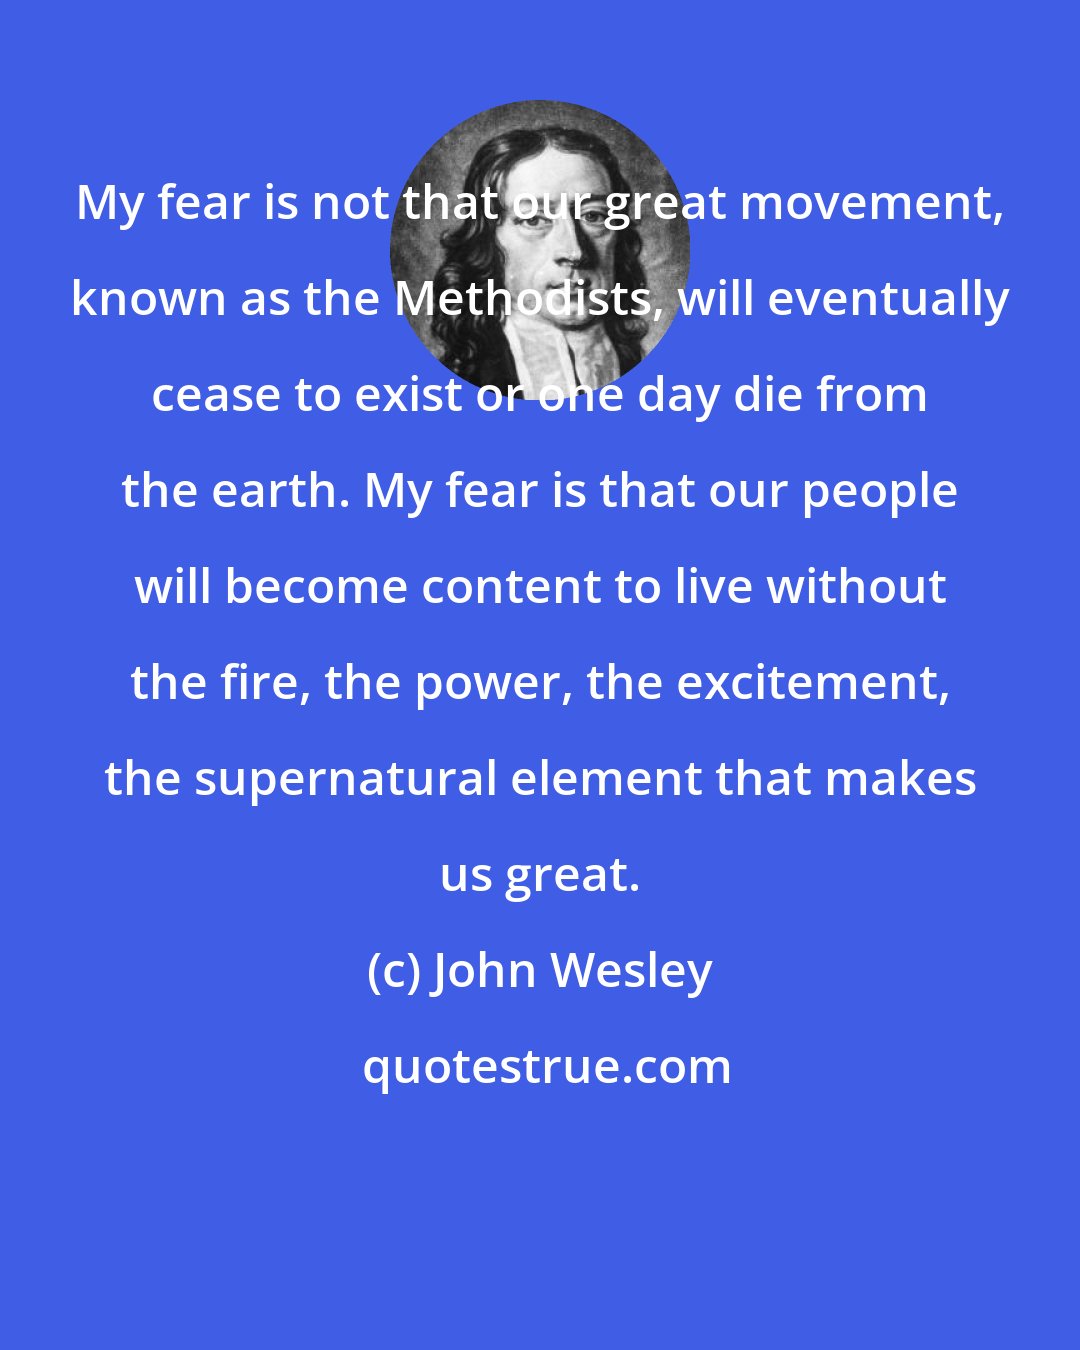 John Wesley: My fear is not that our great movement, known as the Methodists, will eventually cease to exist or one day die from the earth. My fear is that our people will become content to live without the fire, the power, the excitement, the supernatural element that makes us great.